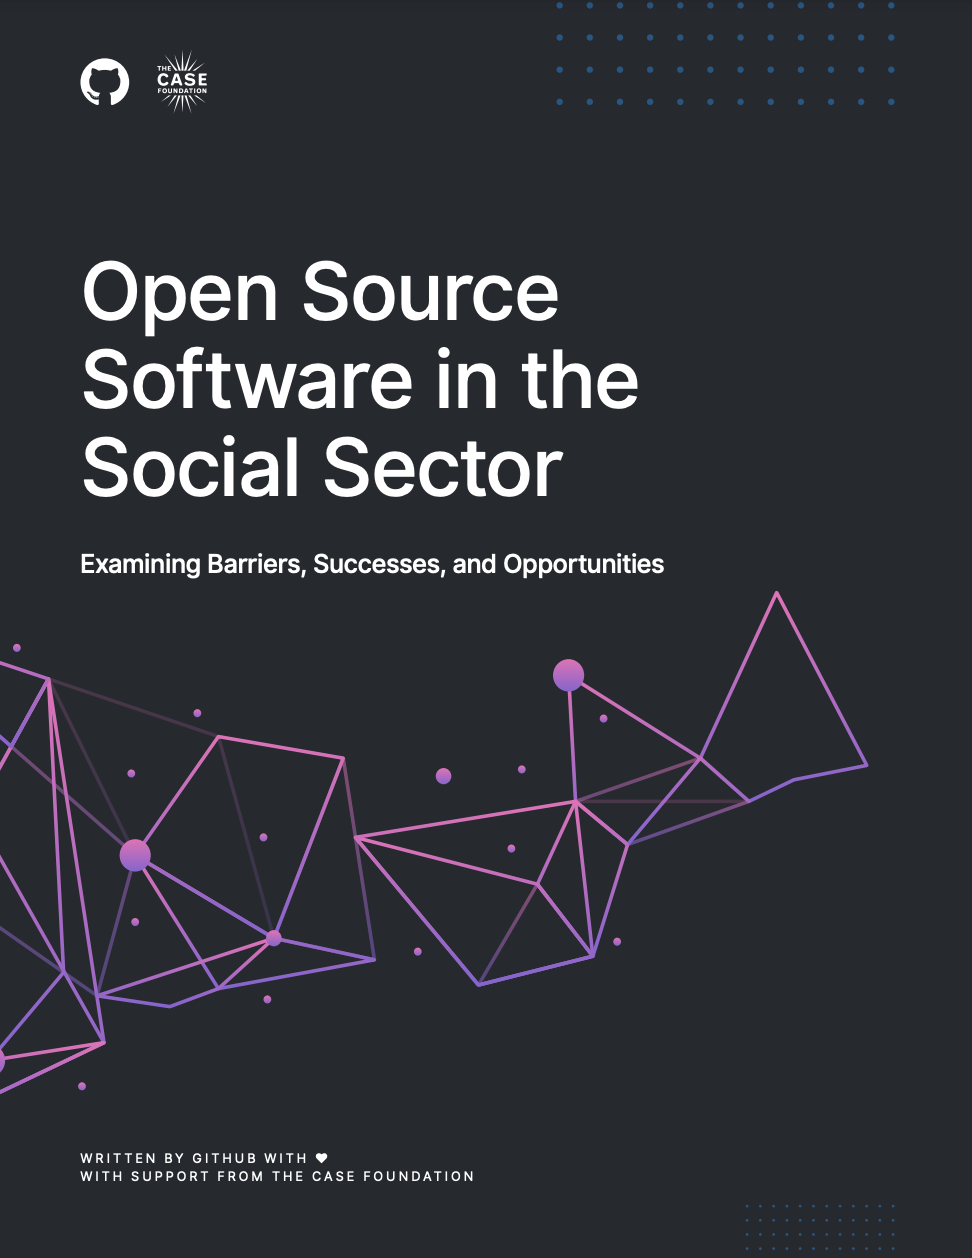 Open source software in the social sector